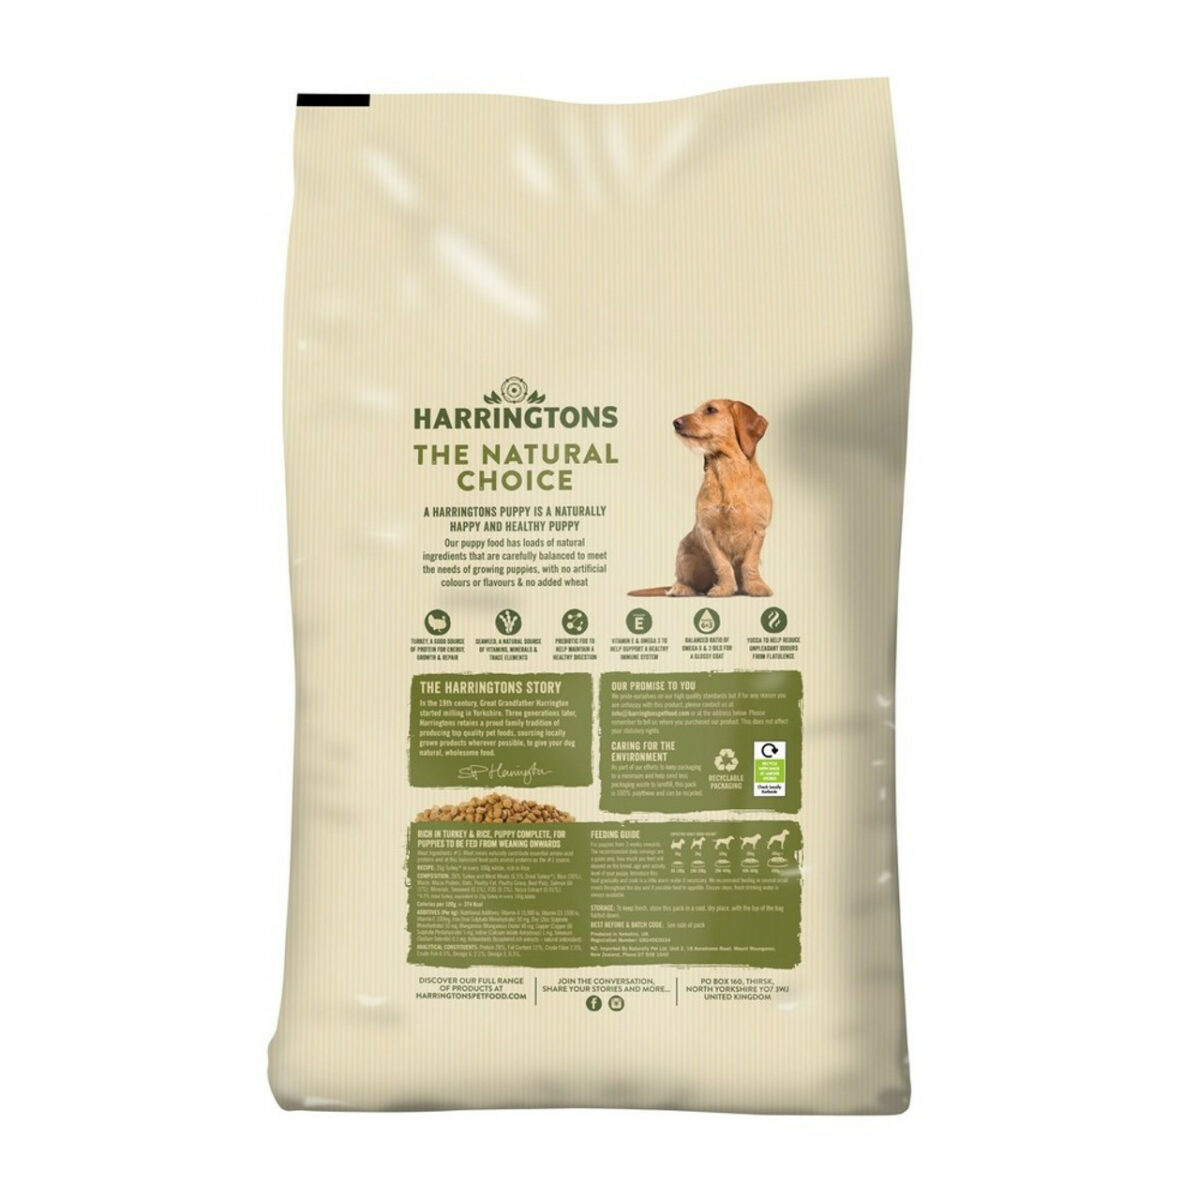 Harringtons Puppy Complete Dry Dog Food with Turkey & Rice 10kg from Catdog Store